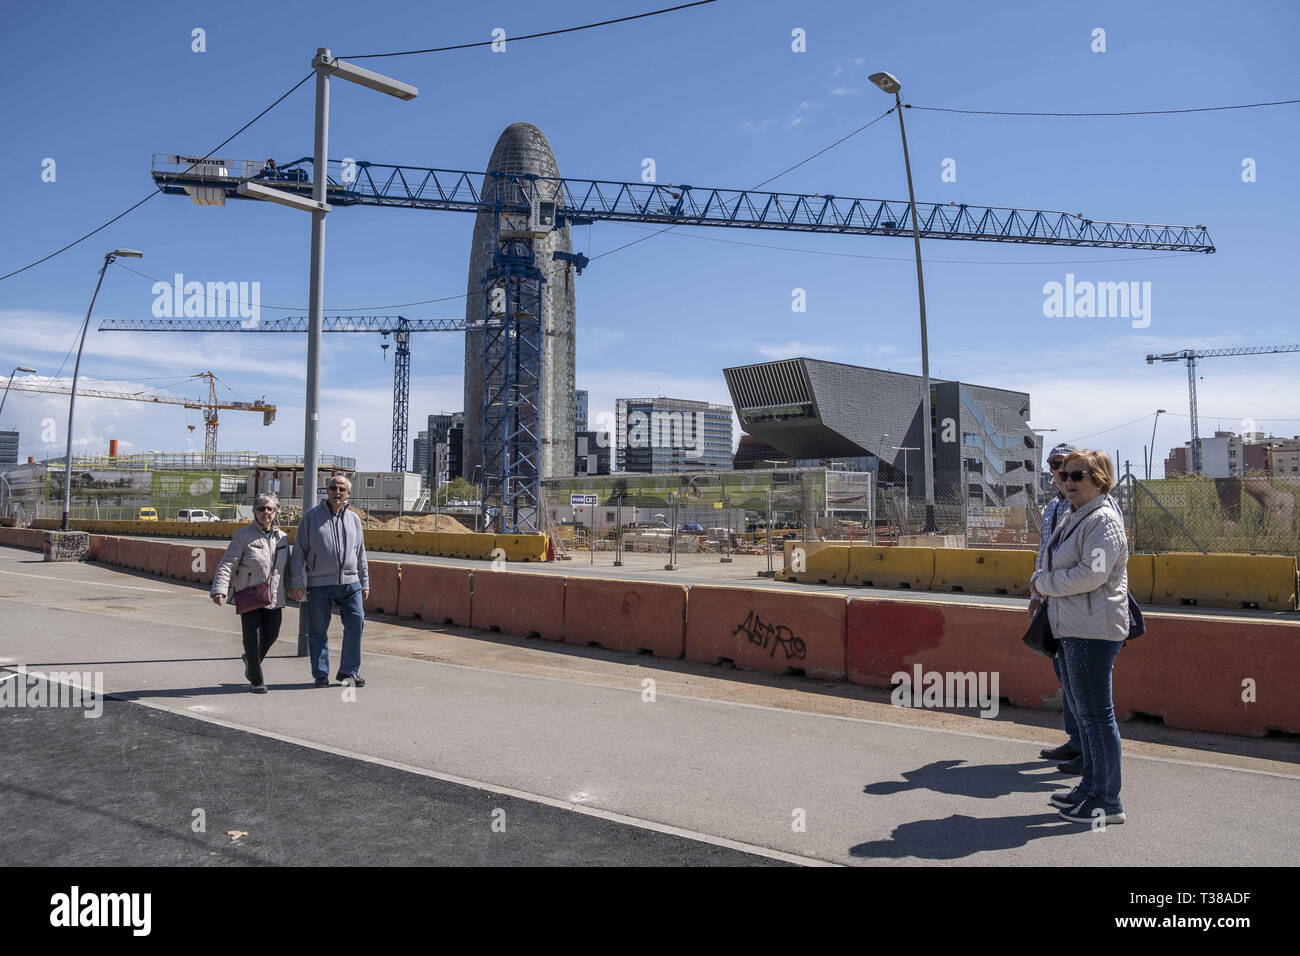 Barcelona, Catalonia, Spain. 7th Apr, 2019. Several people seen at the new park area that still shows signs of works.From April 6 the citizens of Barcelona can visit and be users of a new green surface of 20,400 m2 with 400 trees. The new Les GlÃ²ries park is the final urban solution to a large concentration of vehicle traffic that will circulate underground in the future. This new green area also rehabilitates an urban area that already has very important cultural centers. Credit: ZUMA Press, Inc./Alamy Live News Stock Photo